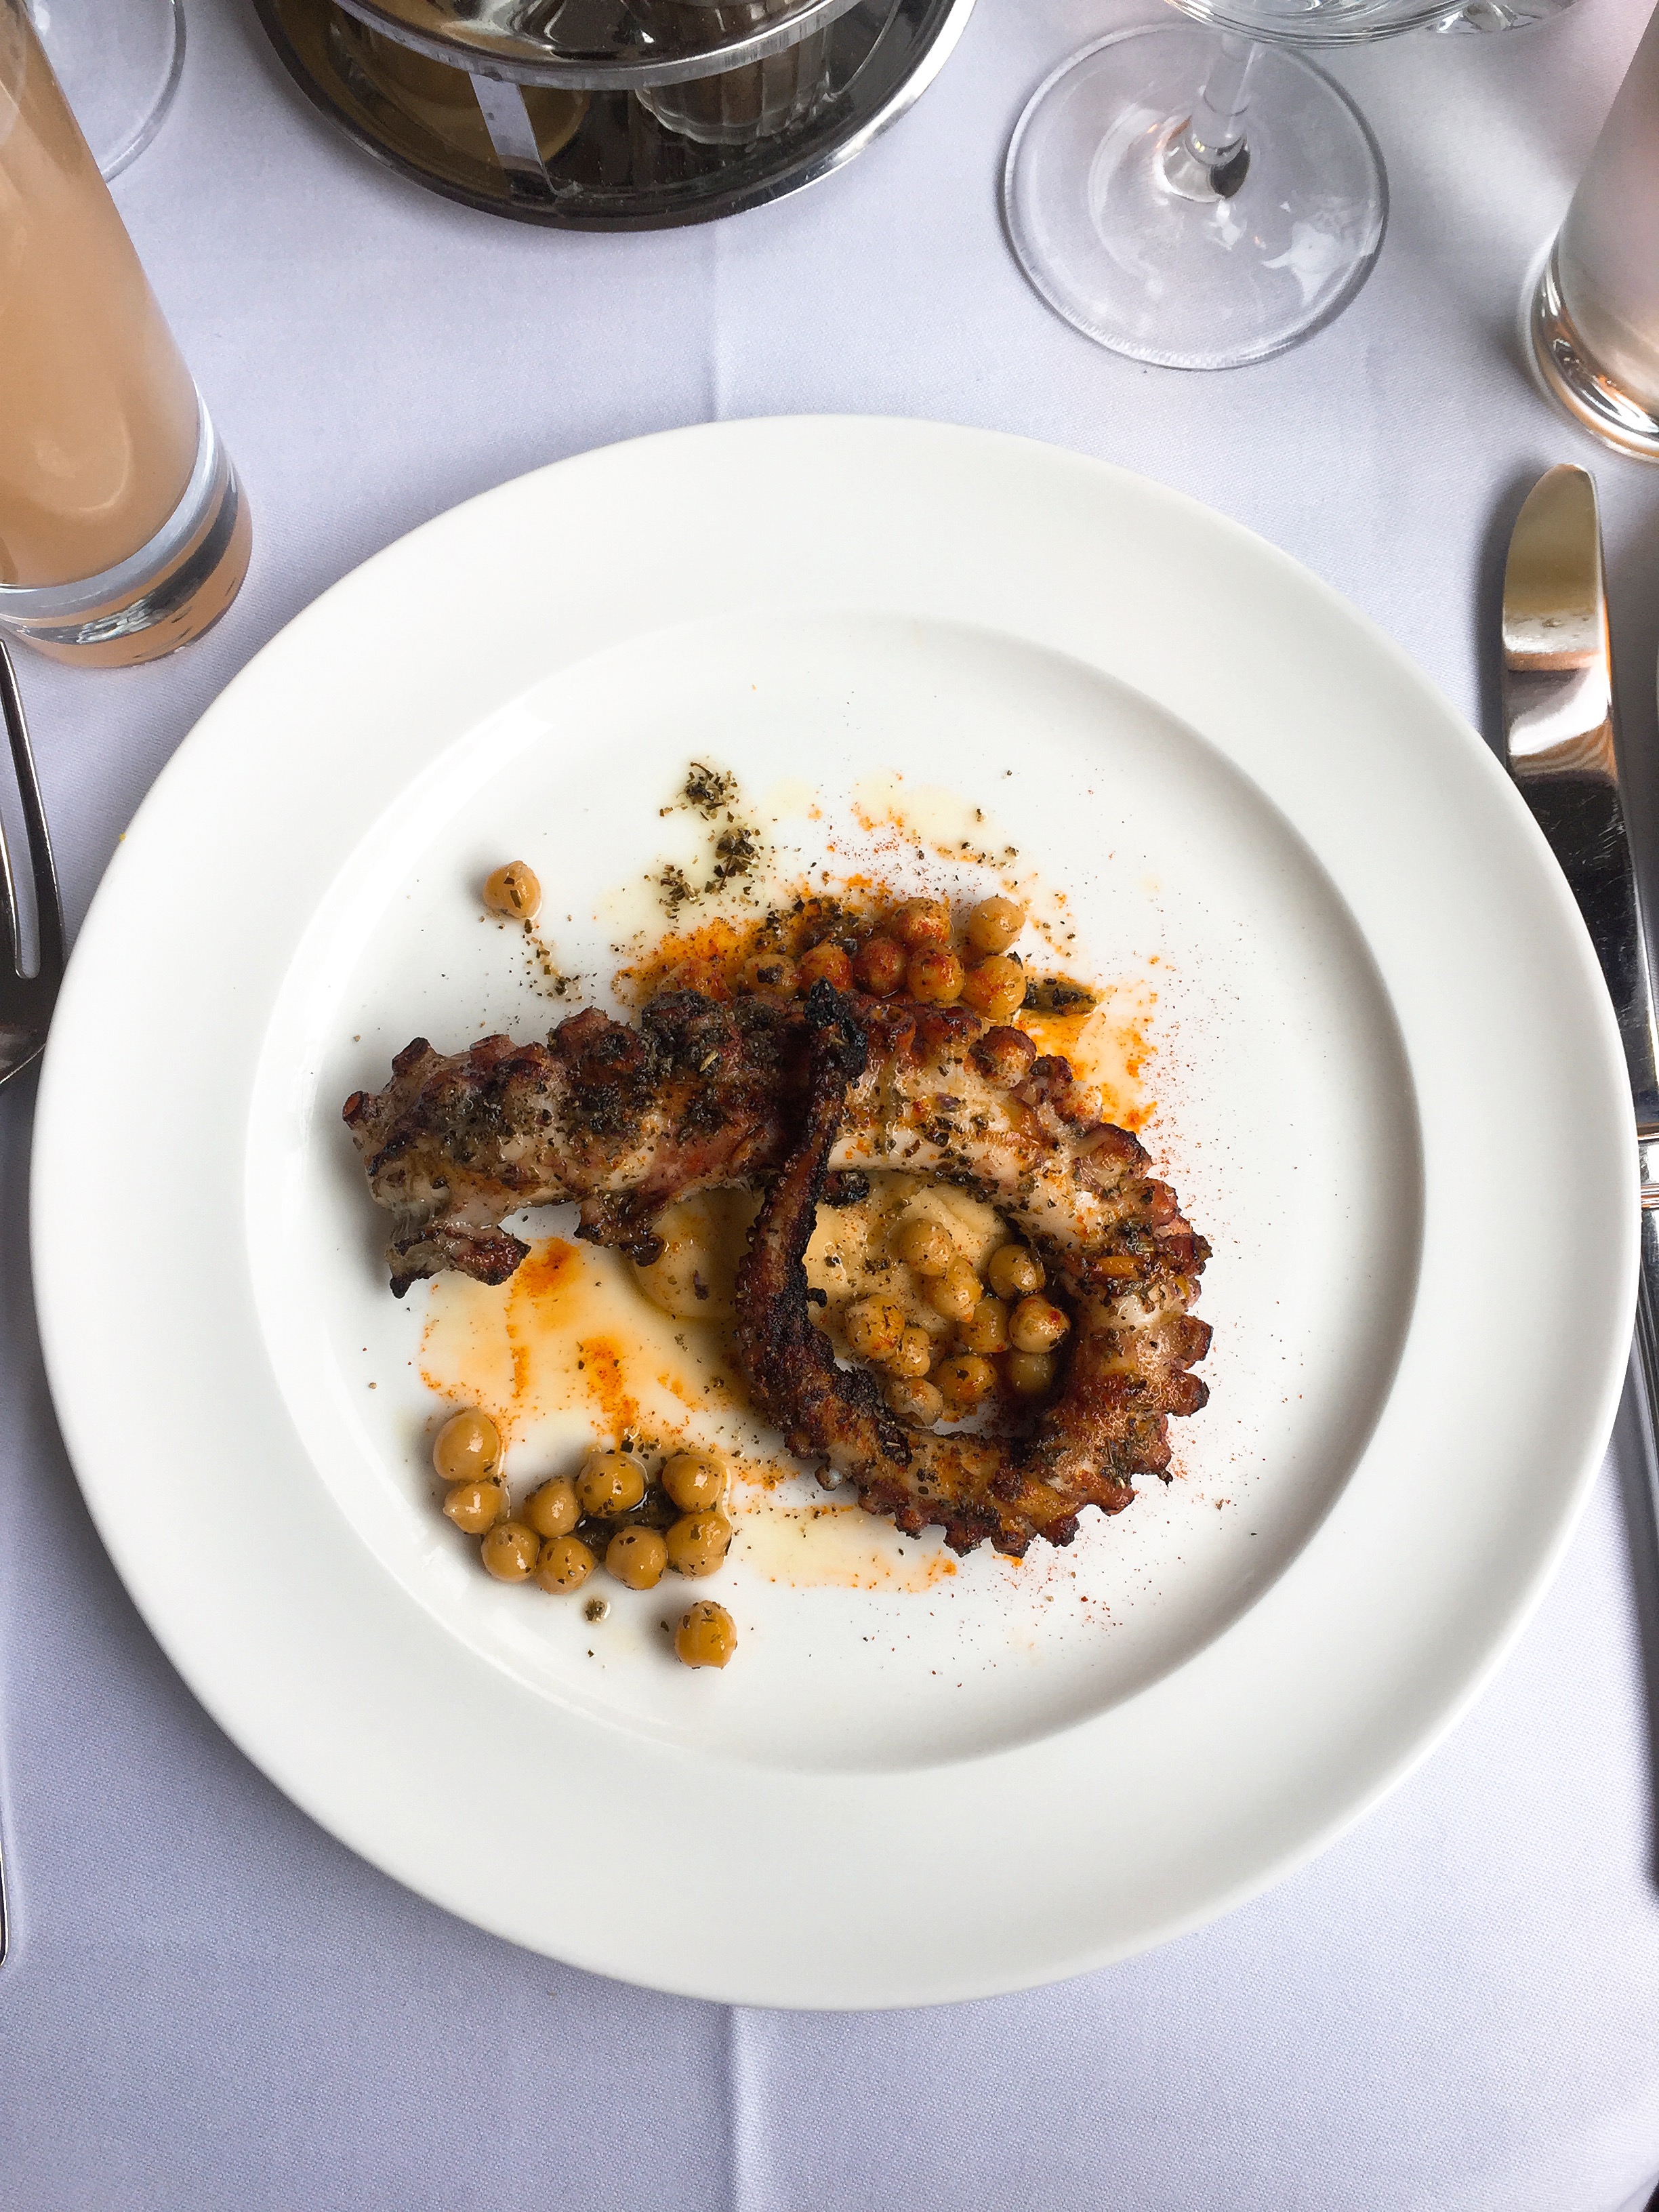 Grilled Octopus - Cafe Monico review